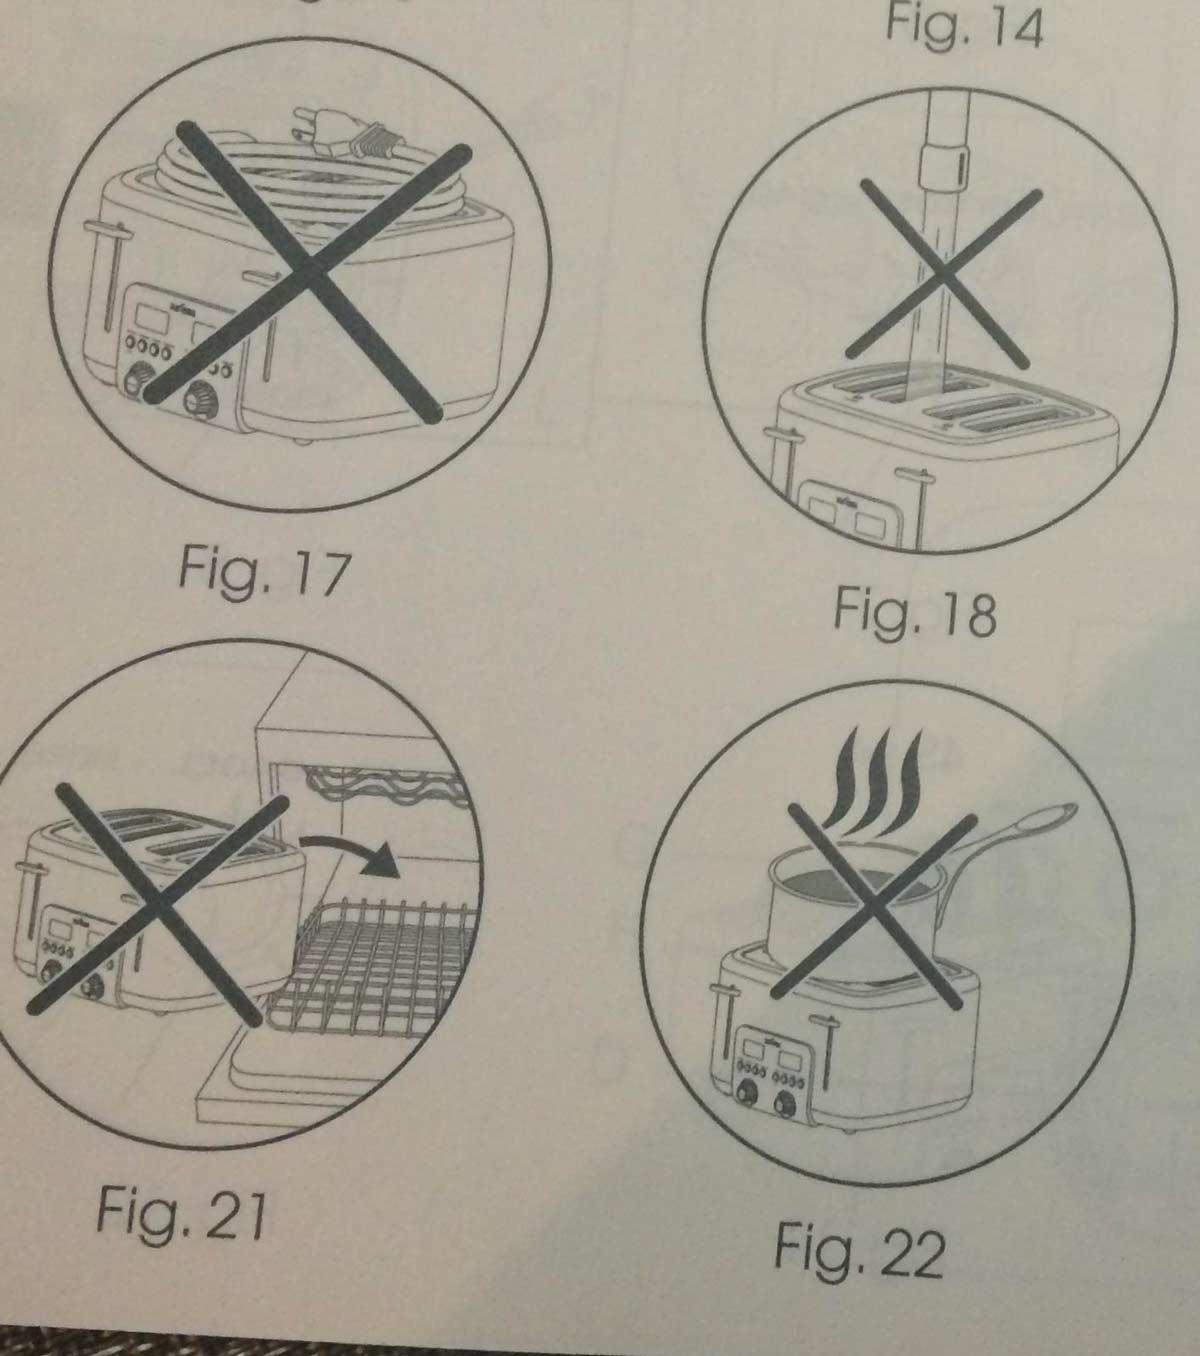 Very helpful instructions from my new toaster